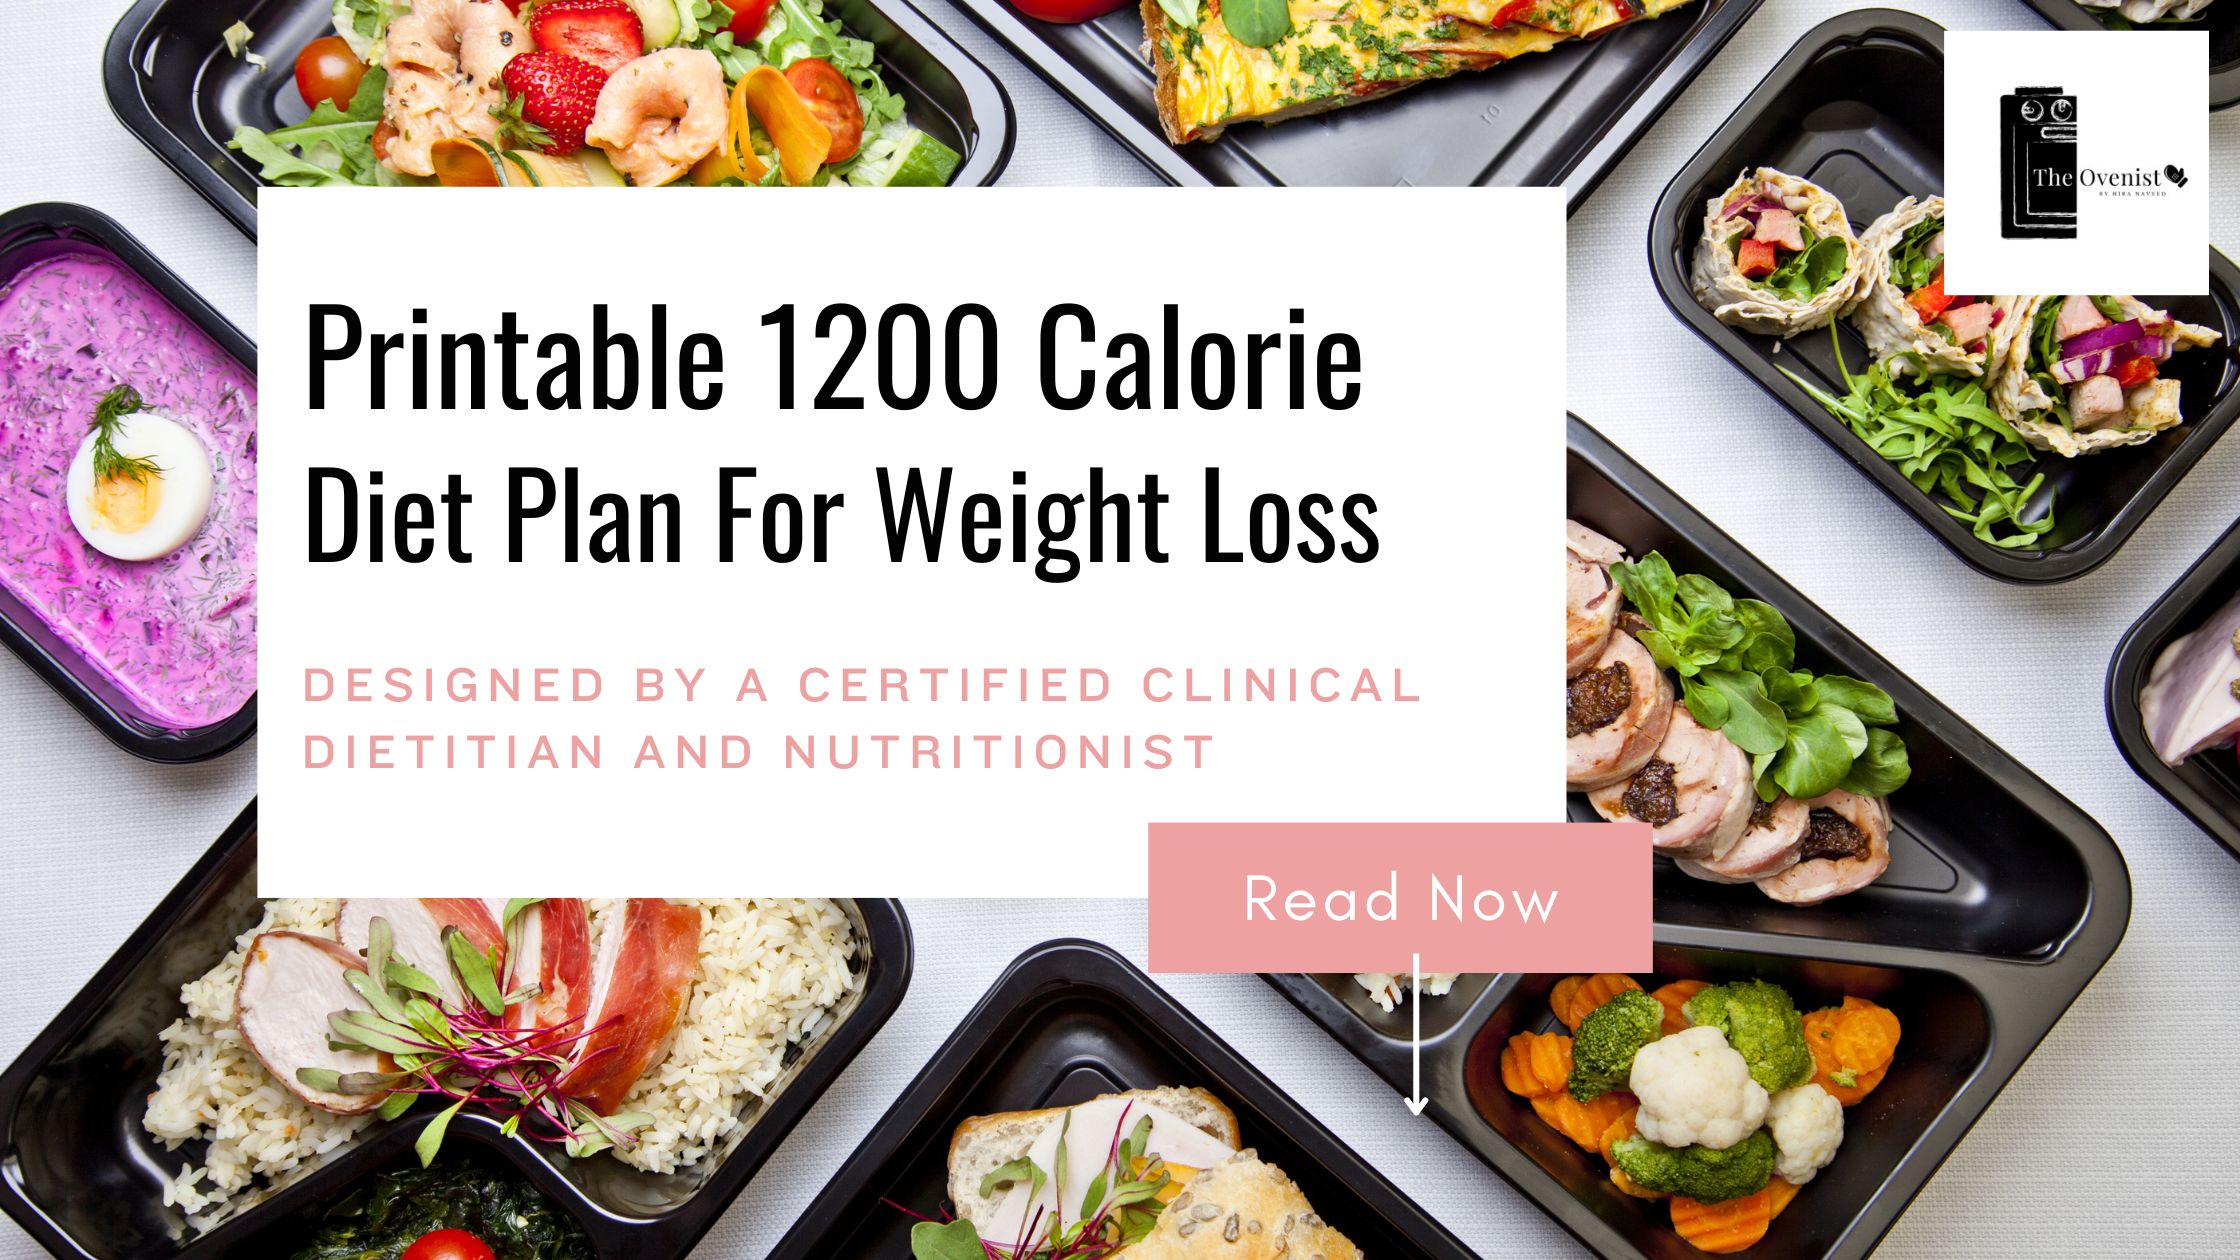 Printable 1200 Calorie Diet Plan For Weight Loss